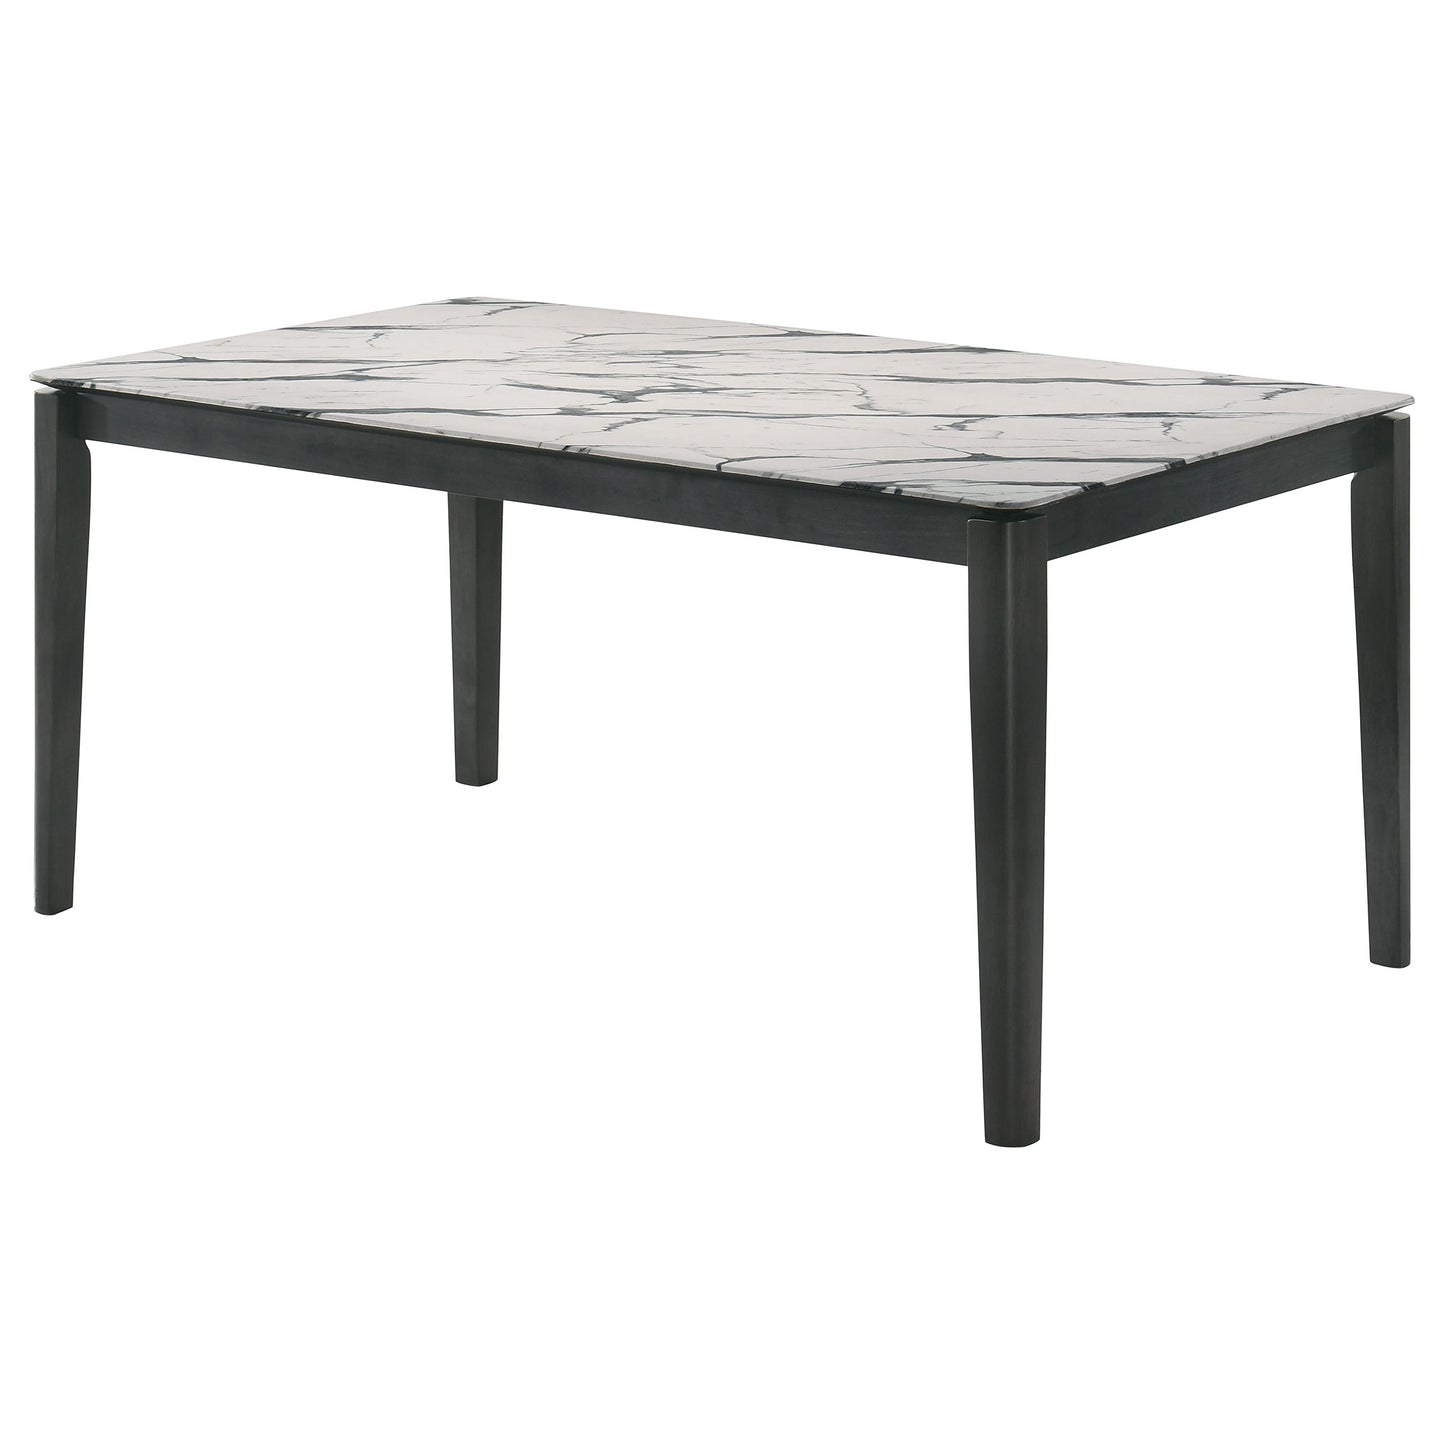 Stevie Rectangular Faux Marble Top Dining Table White and Black